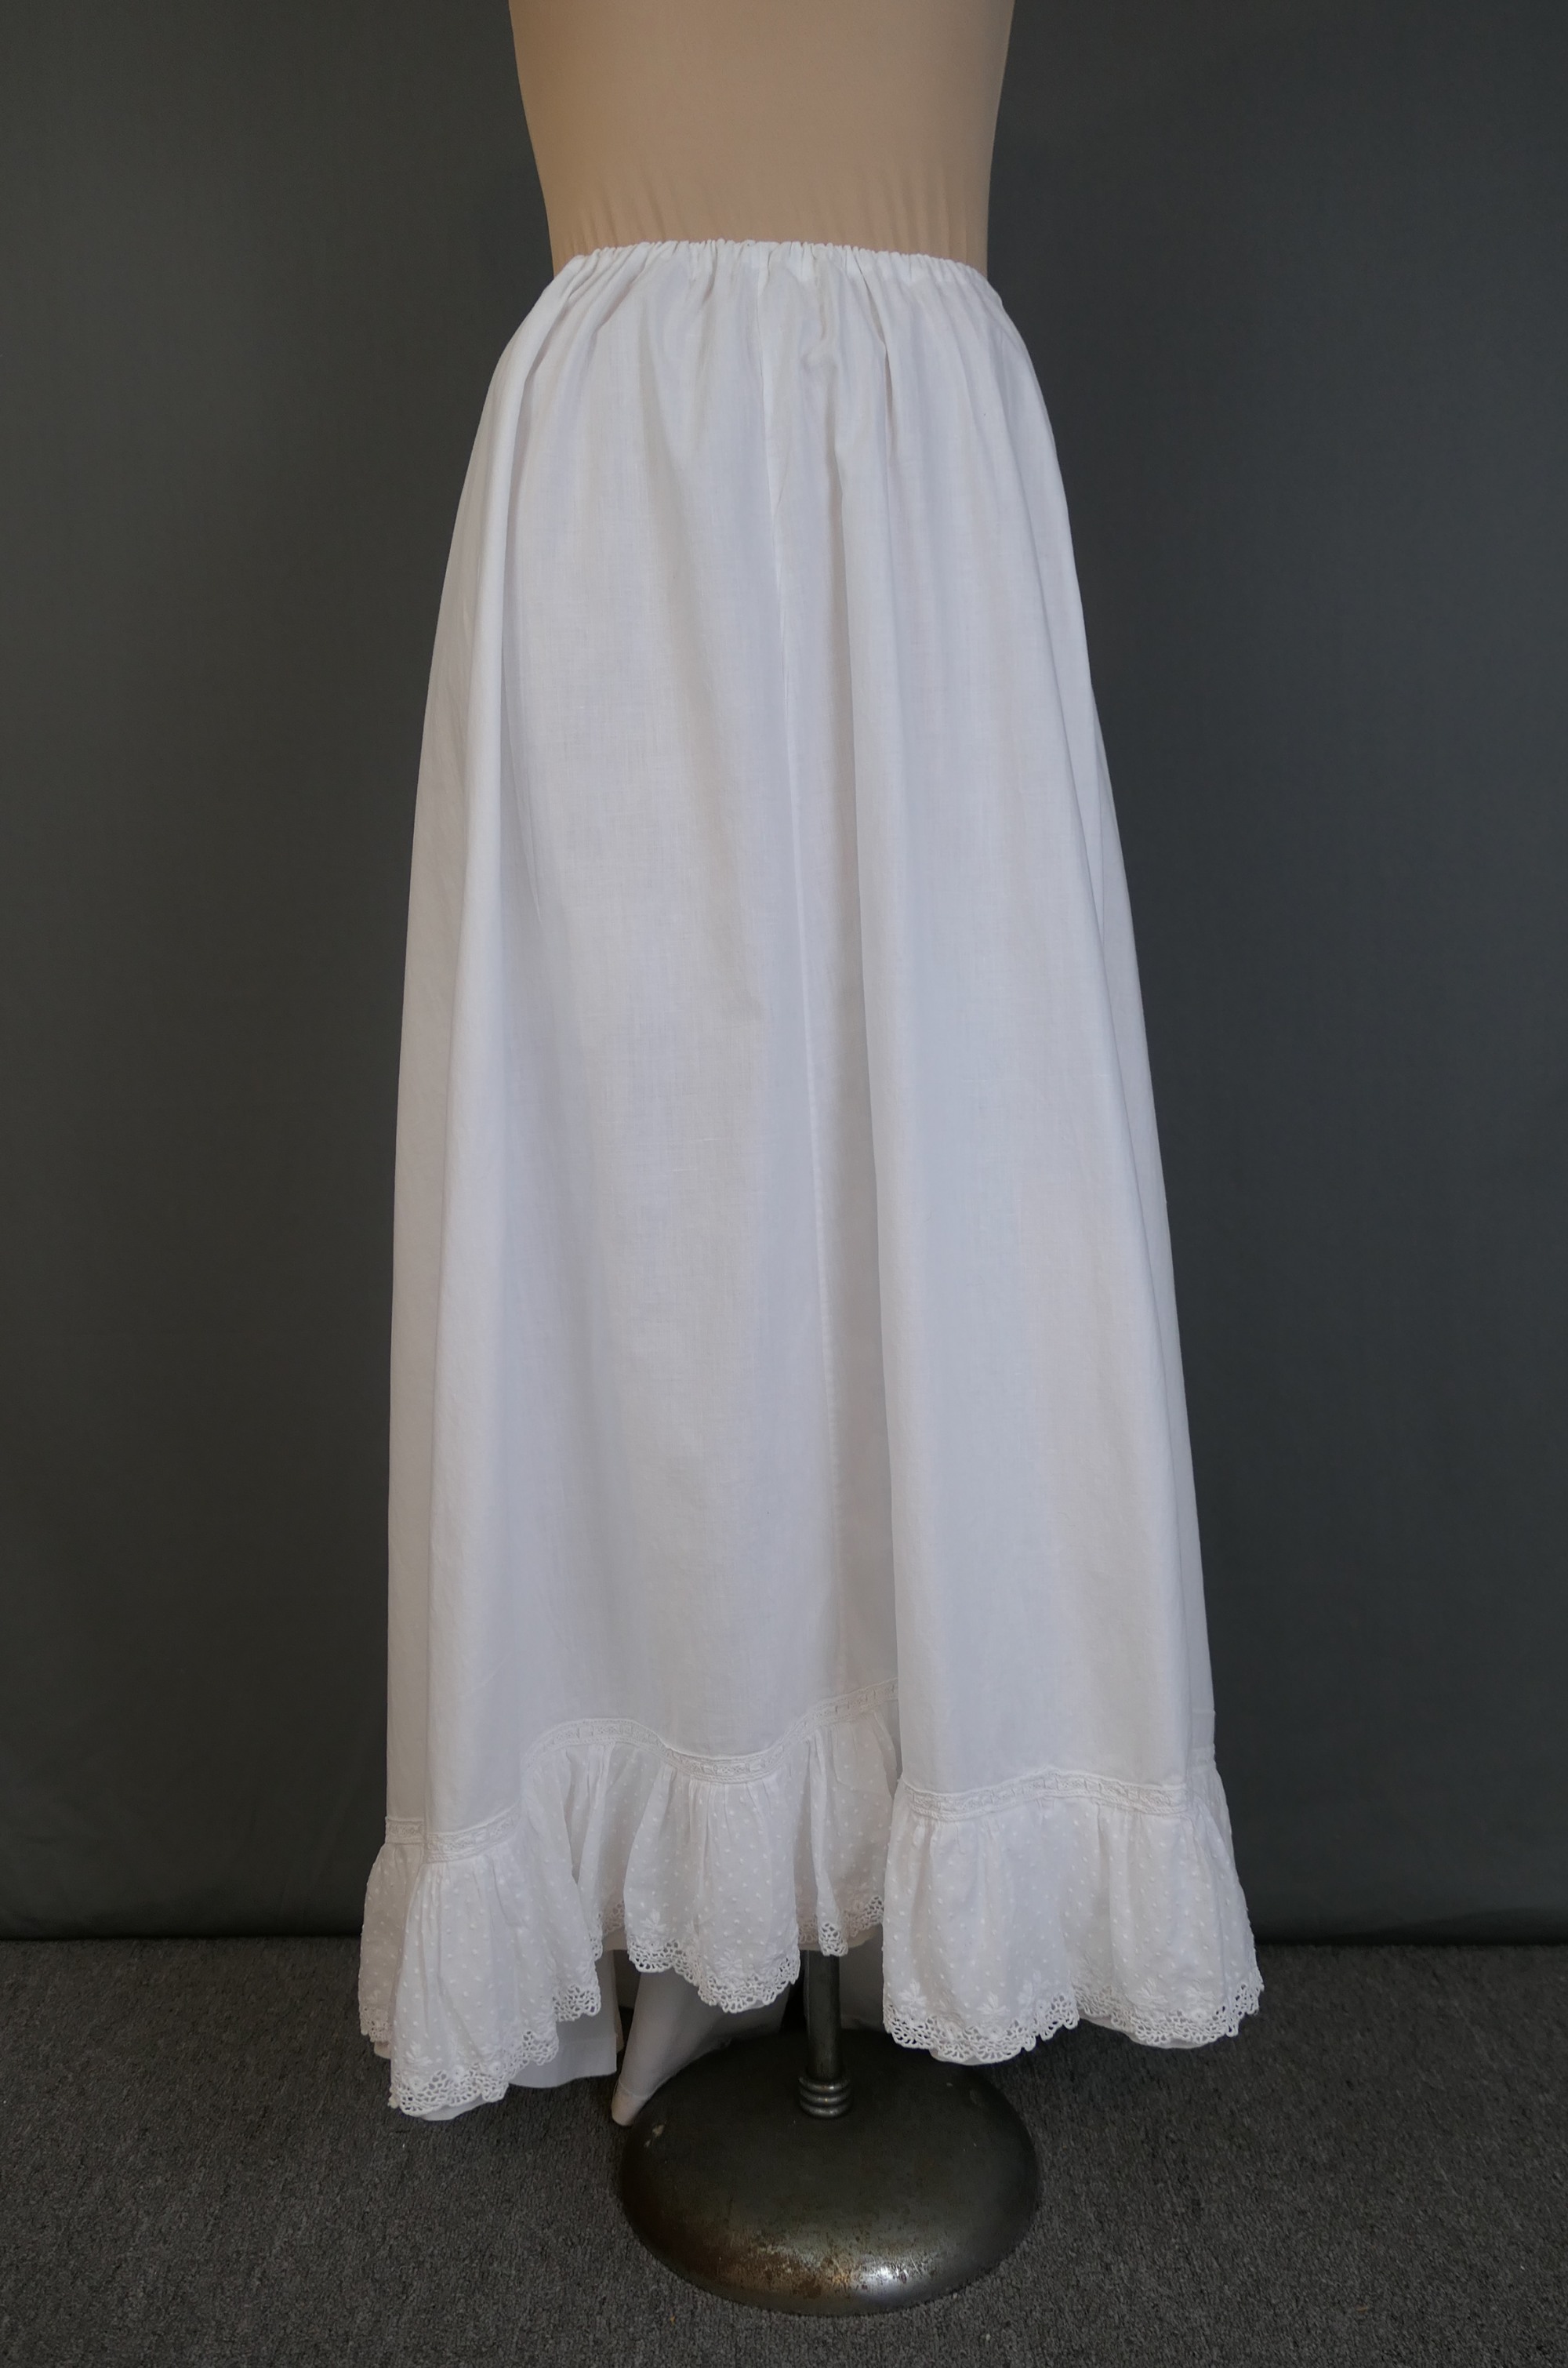 Antique White Cotton Petticoat Victorian with longer back, Dotted Swiss  Trim, large drawstring waist, issues - Dandelion Vintage